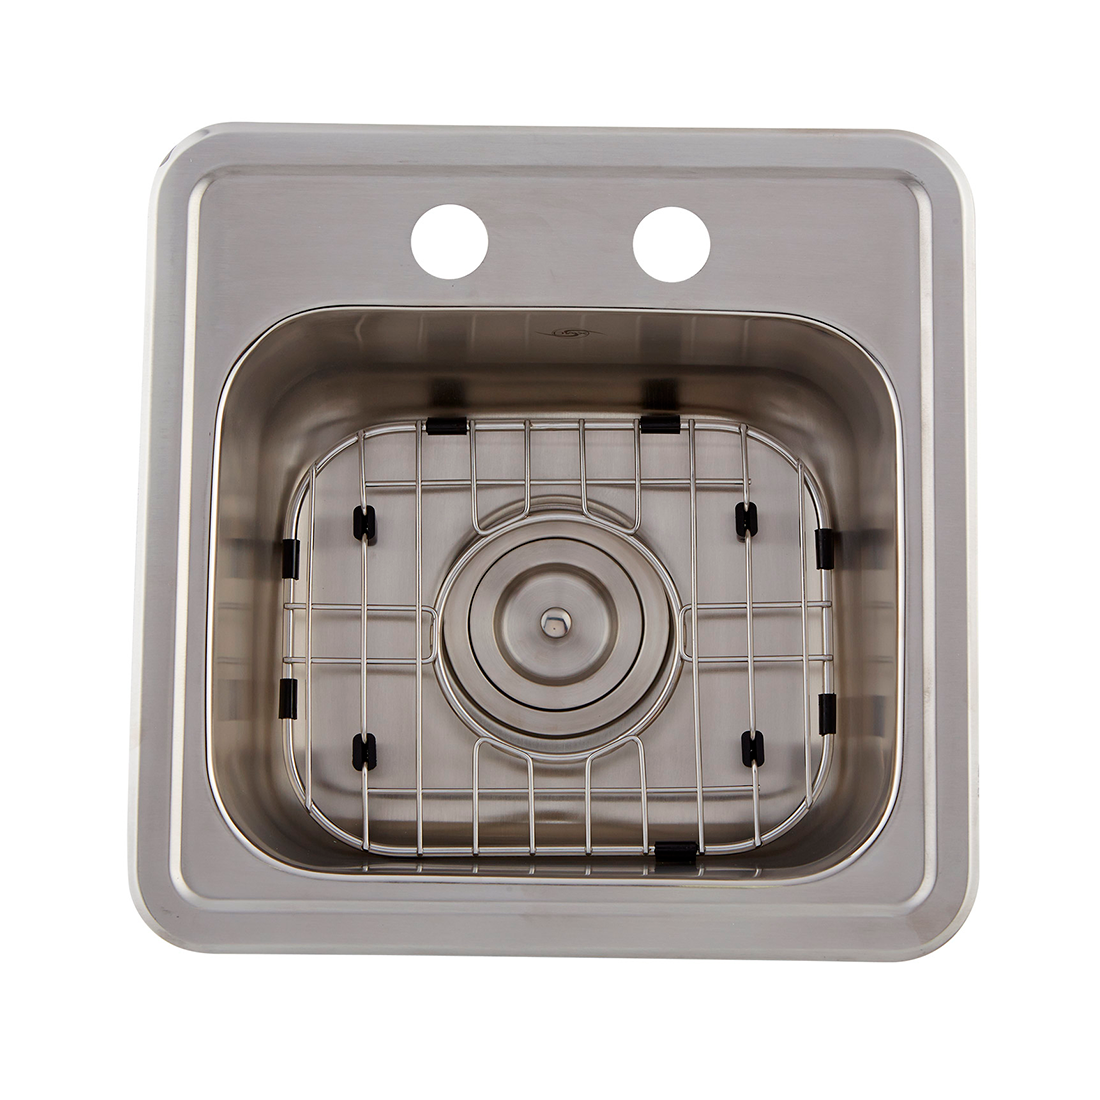 DAX Grid for Kitchen Sink, Stainless Steel Body, Chrome Finish, Compatible with DAX-OM1515, 11 x 8 Inches (GRID-OM1515)